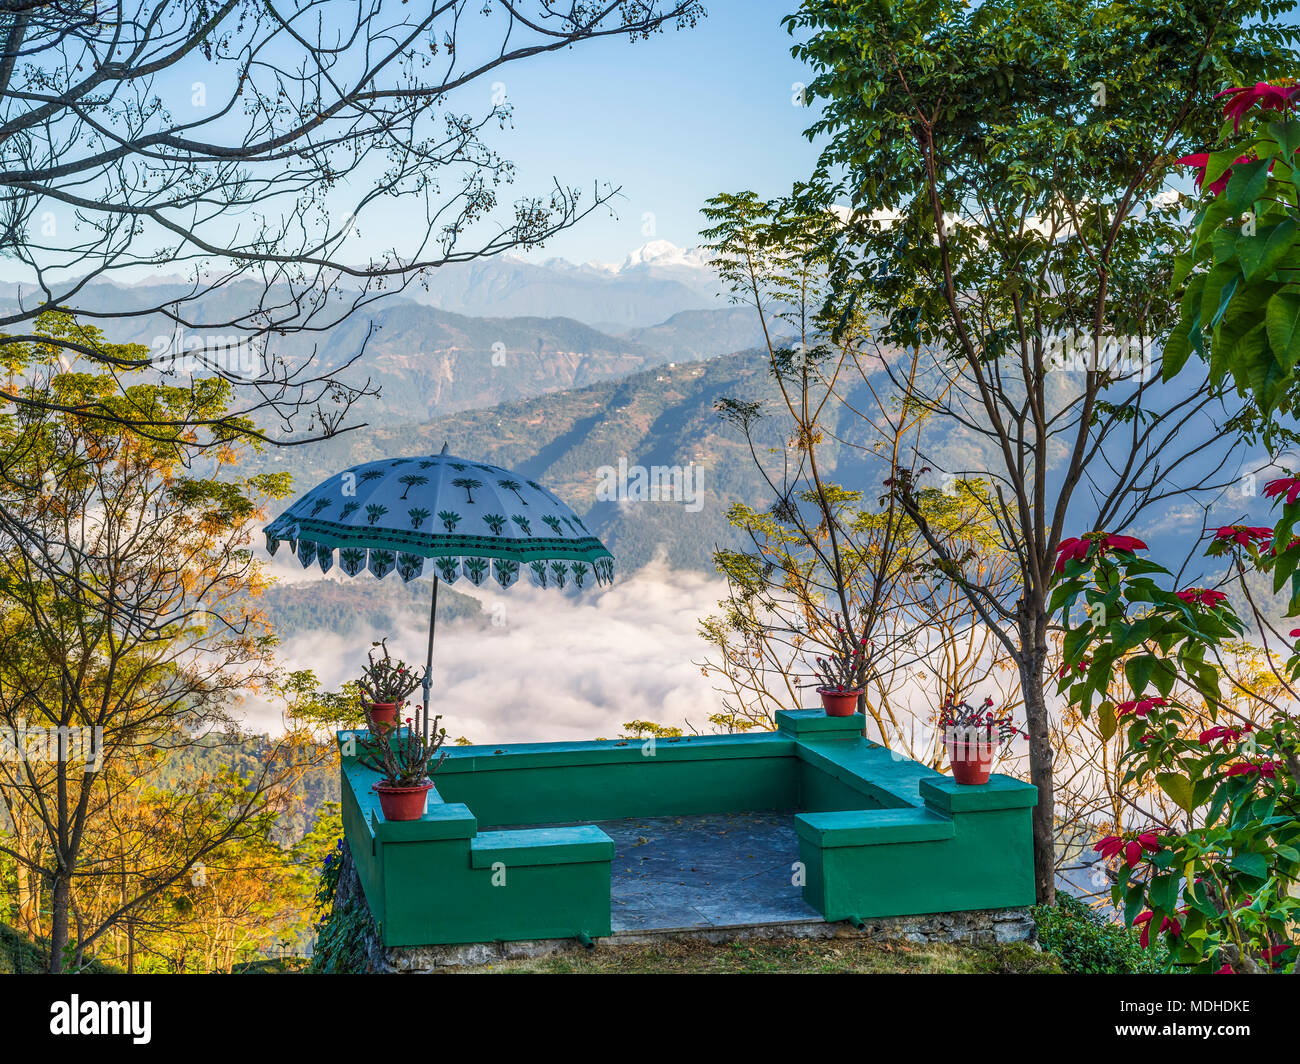 A small green terrace with umbrella decorated with plants and overlooking the mountains and valley; West Bengal, India Stock Photo